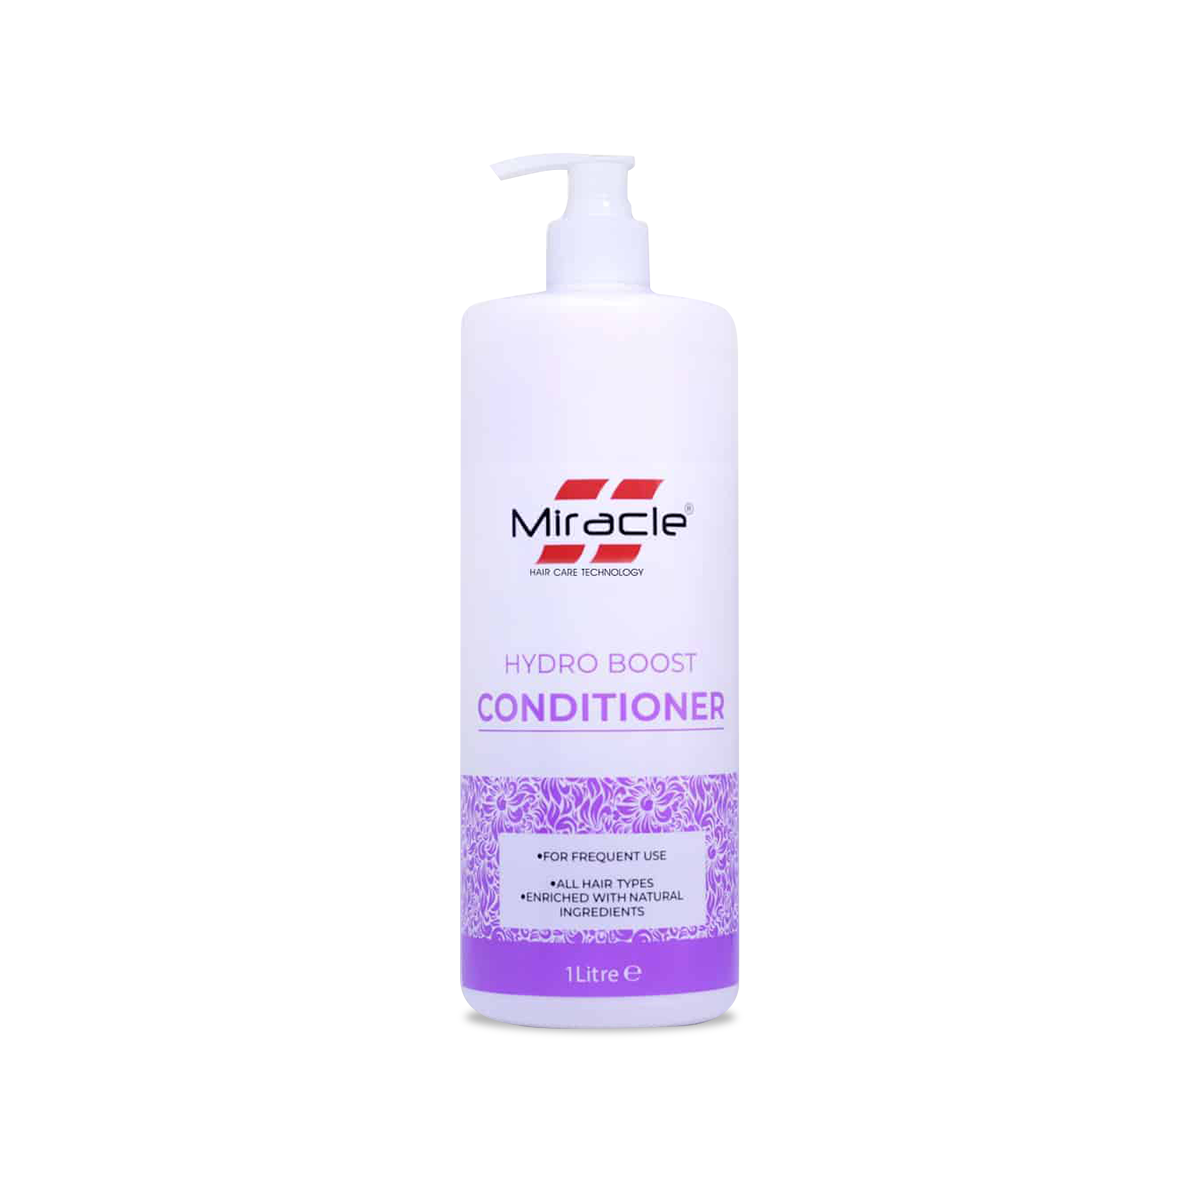 MIRACLE HYDRO BOOST CONDITIONER